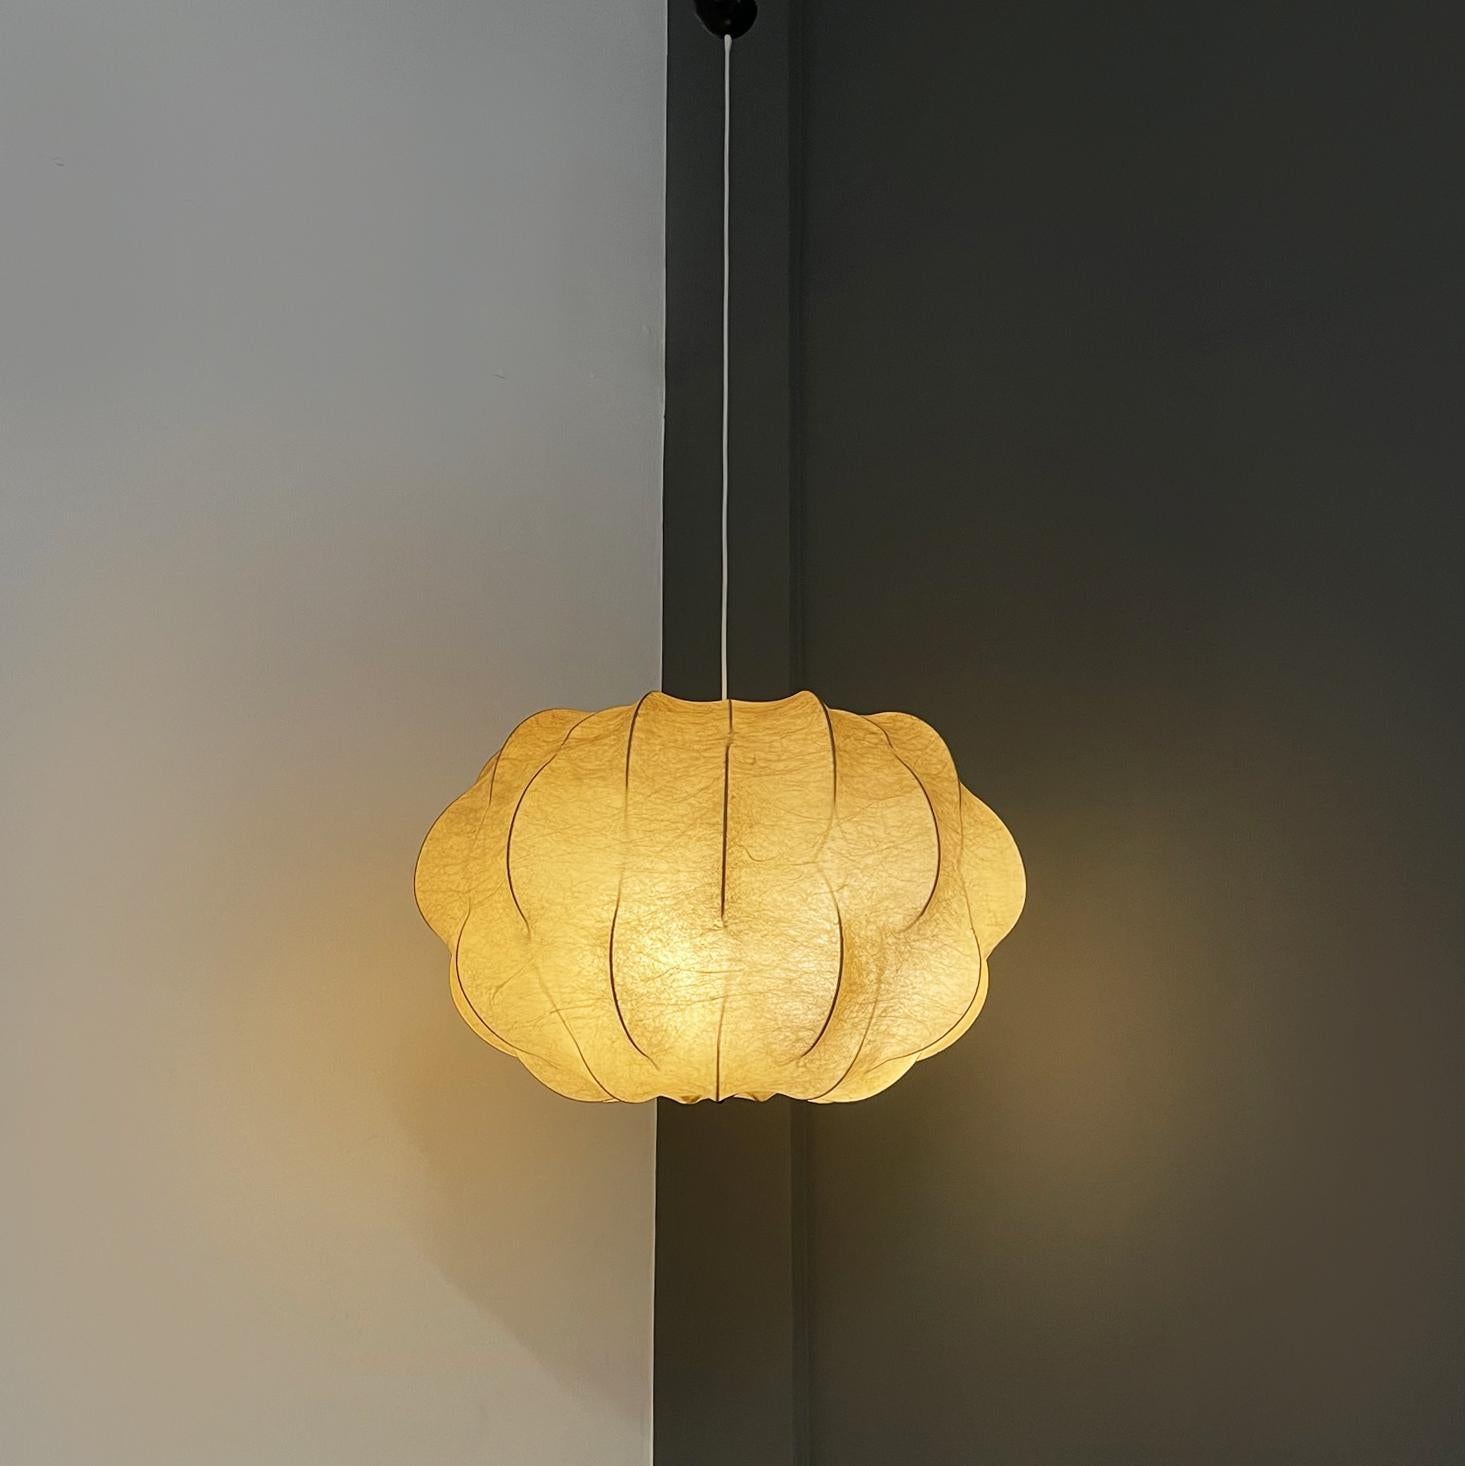 Italian modern cocoon and metal Chandelier Nuvola by Tobia Scarpa for Flos, 1970s
Large chandelier mod. Nuvola in cocoon. The internal structure, which allows the cocoon to remain taut, is in metal rod. It has a black painted metal hemisphere detail